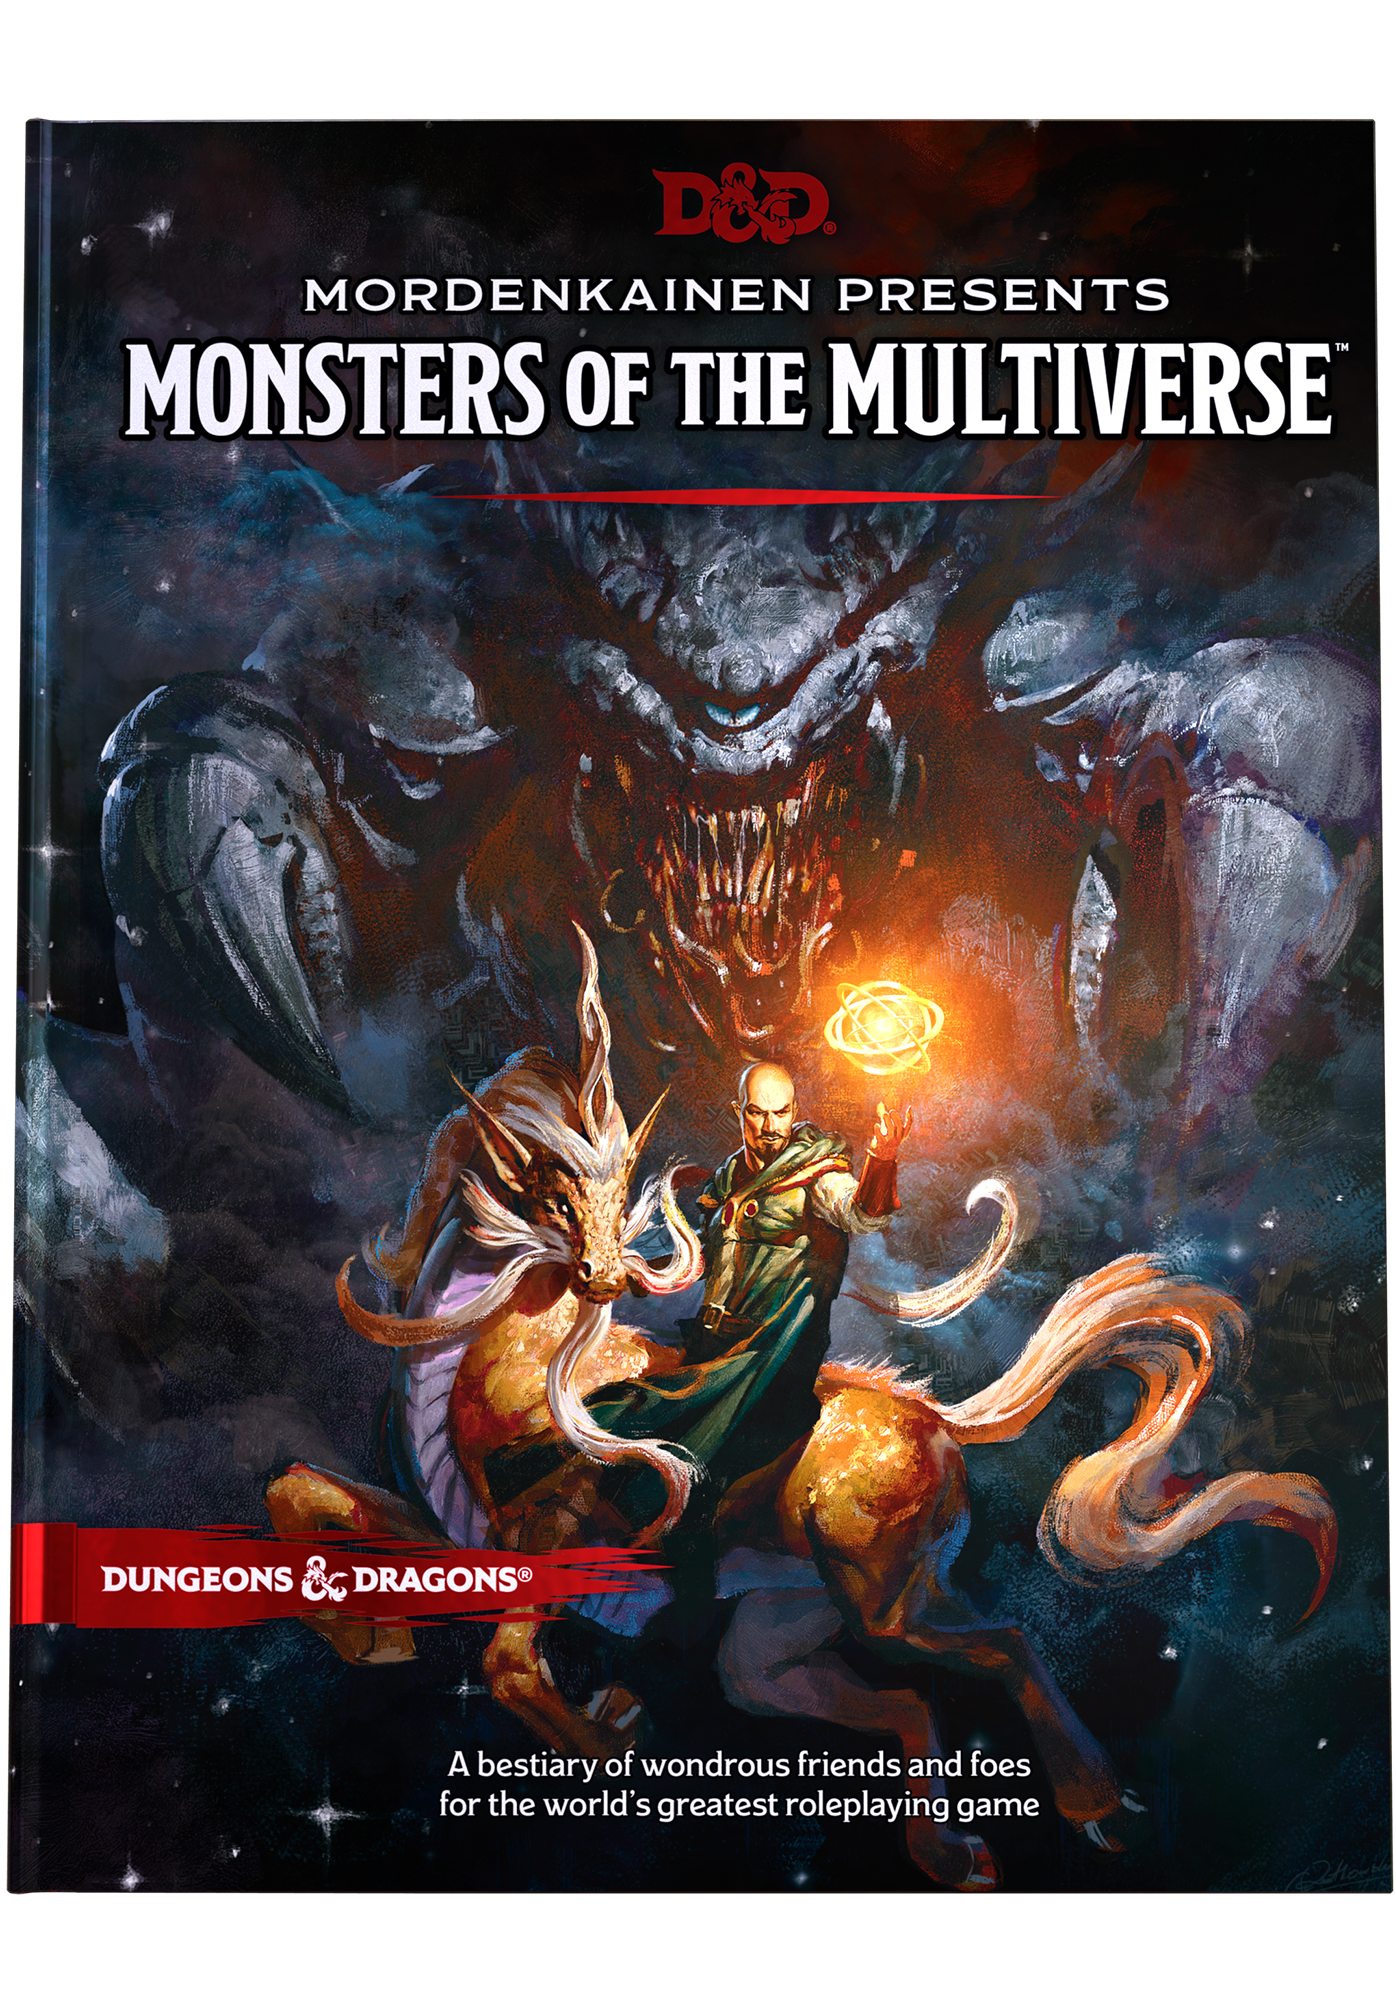 Dungeons & Dragons RPG: Mordenkainen Presents Monsters of the Multiverse Hardcover